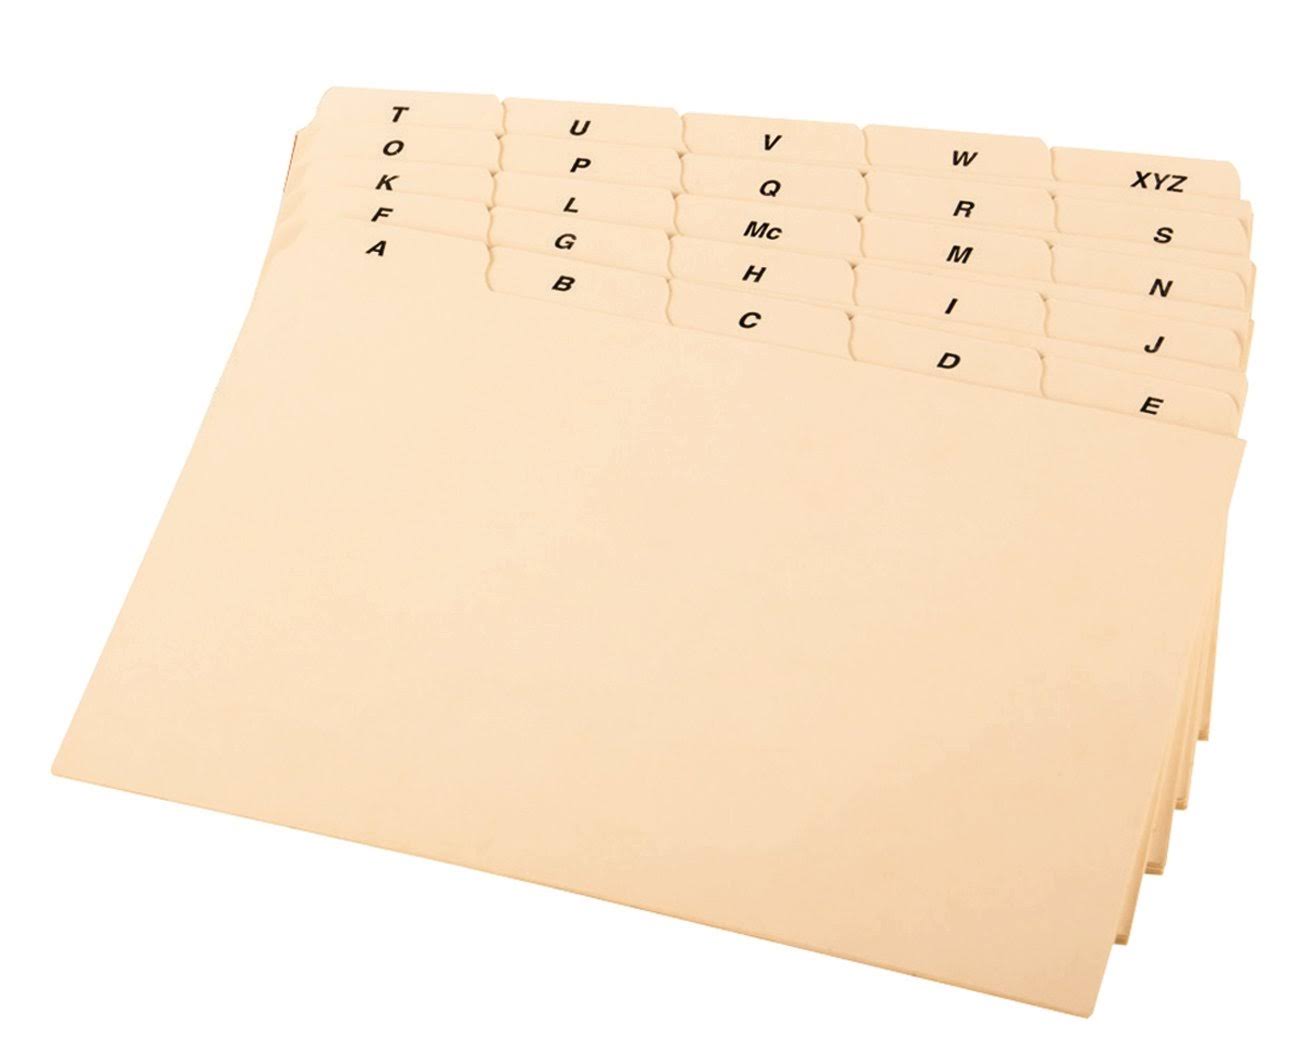 Tops Products Index Card Guides - 4" x 6", Alphabetical